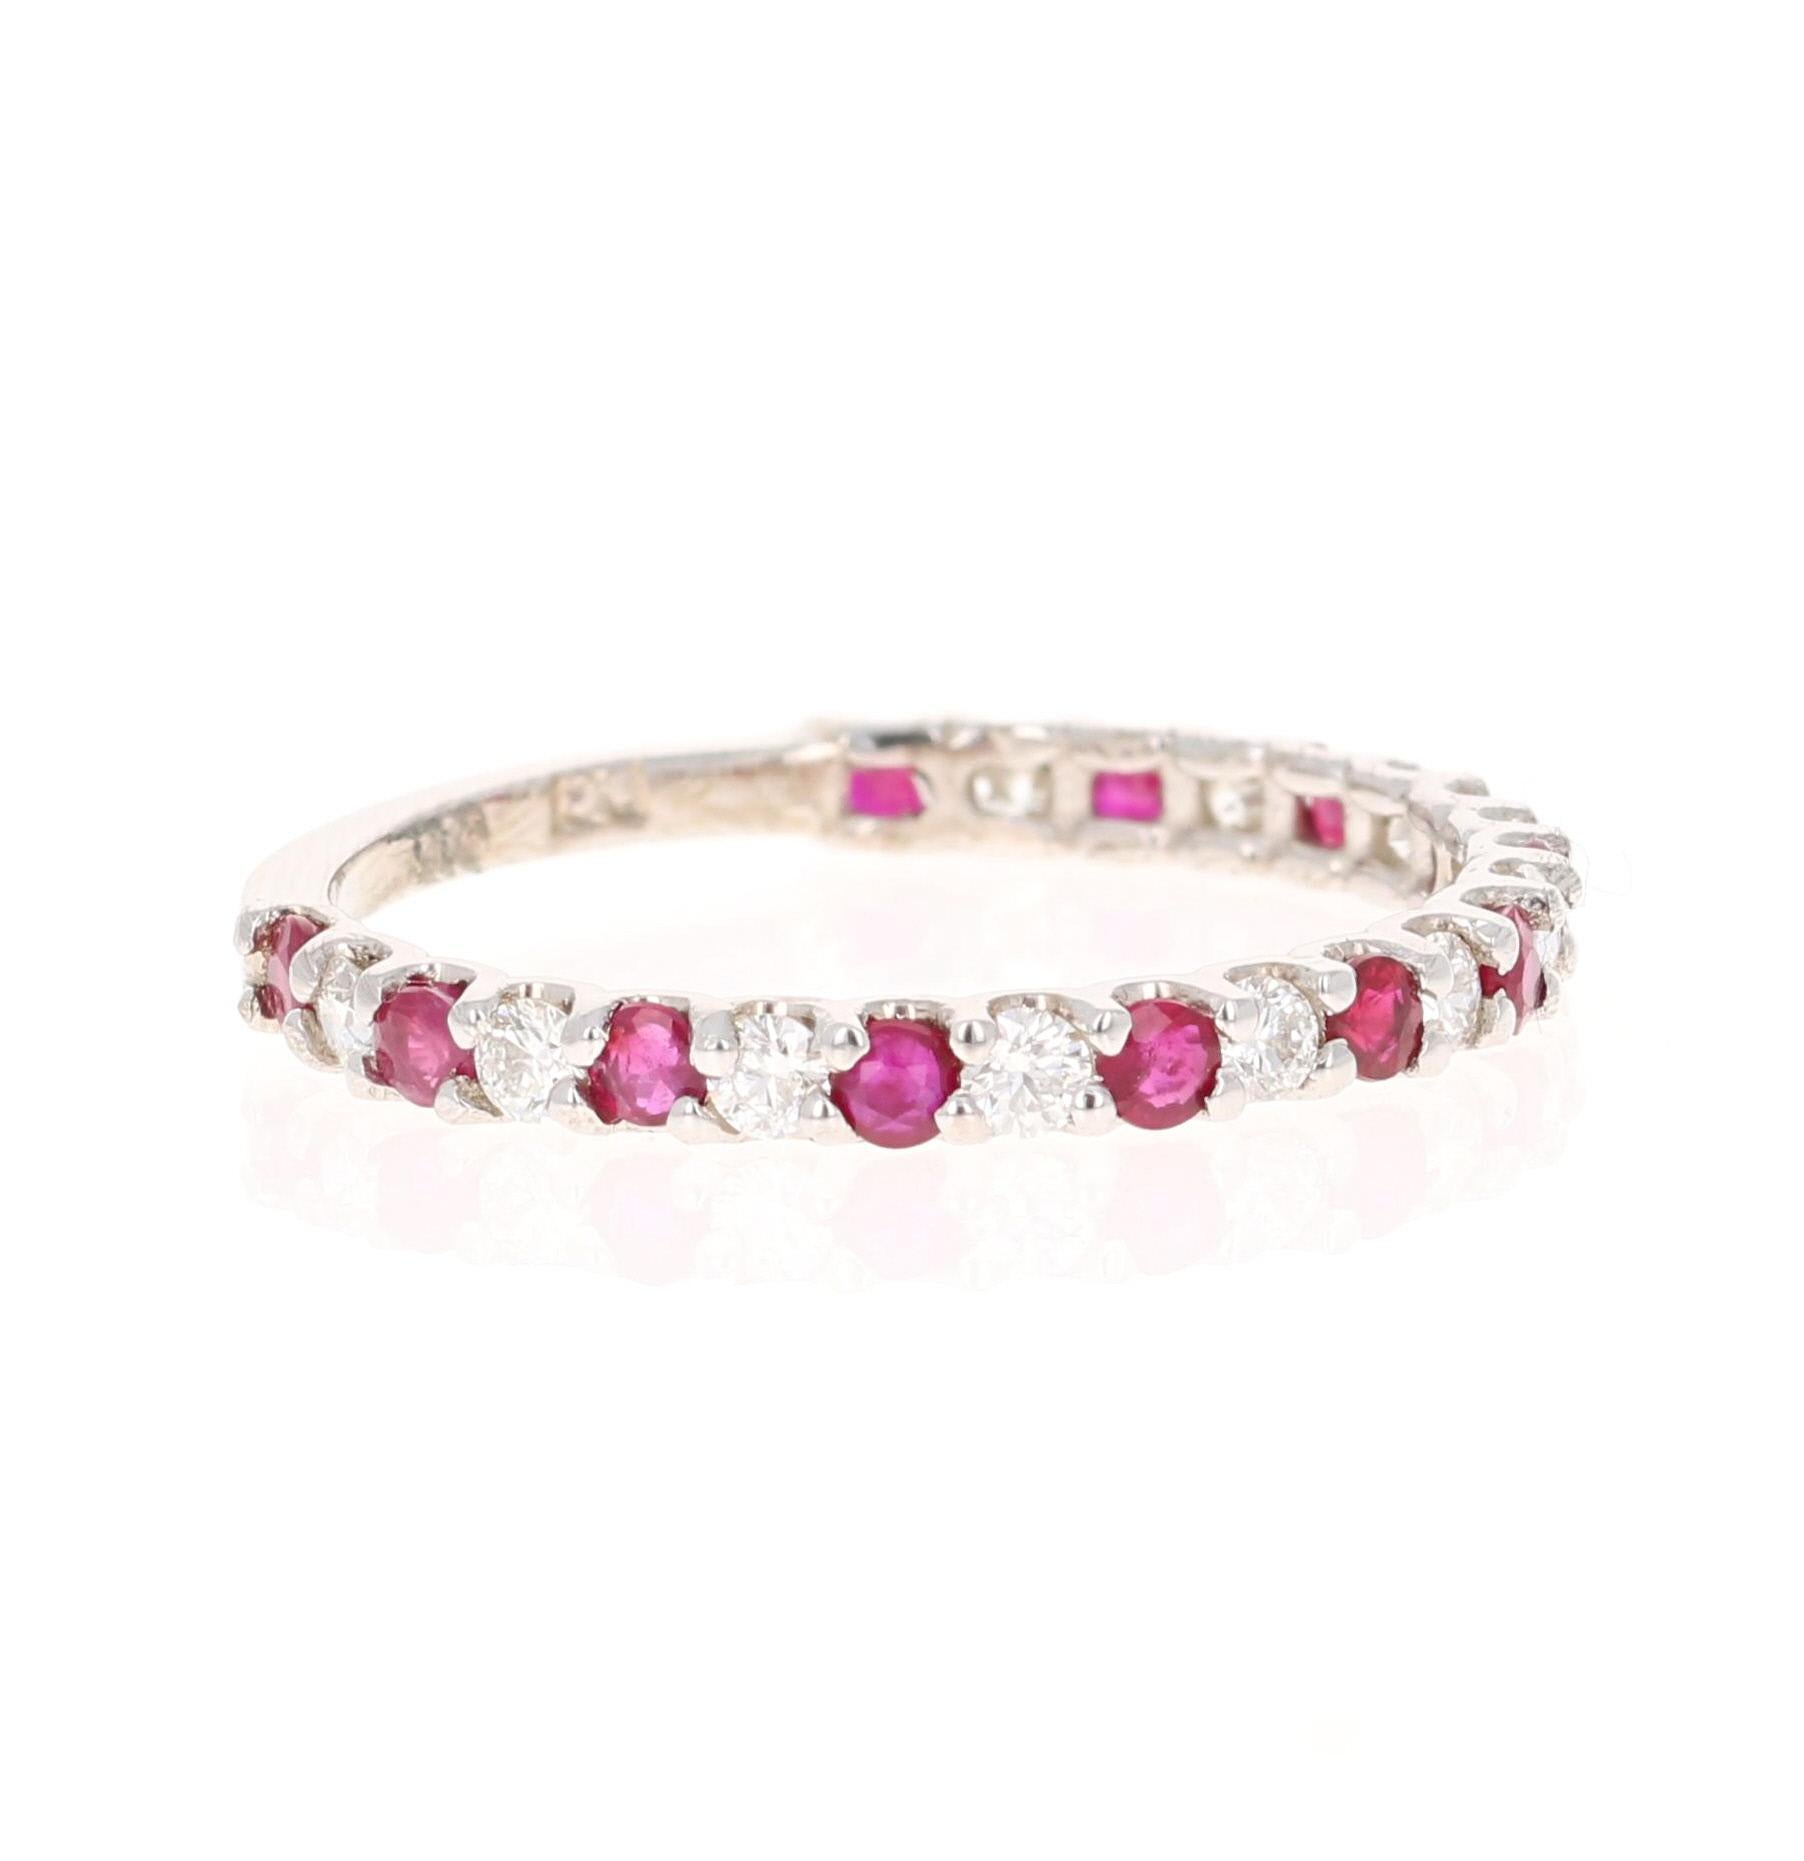 It has 12 Rubies that weigh 0.45 Carats and 11 Round Cut Diamonds that weigh 0.27 Carats. (Clarity: SI, Color: F) The Total Carat Weight of the Band is 0.72 Carats
It is made in 14K White Gold and weighs 1.2 Grams.
It’s a size 7 and can be resized